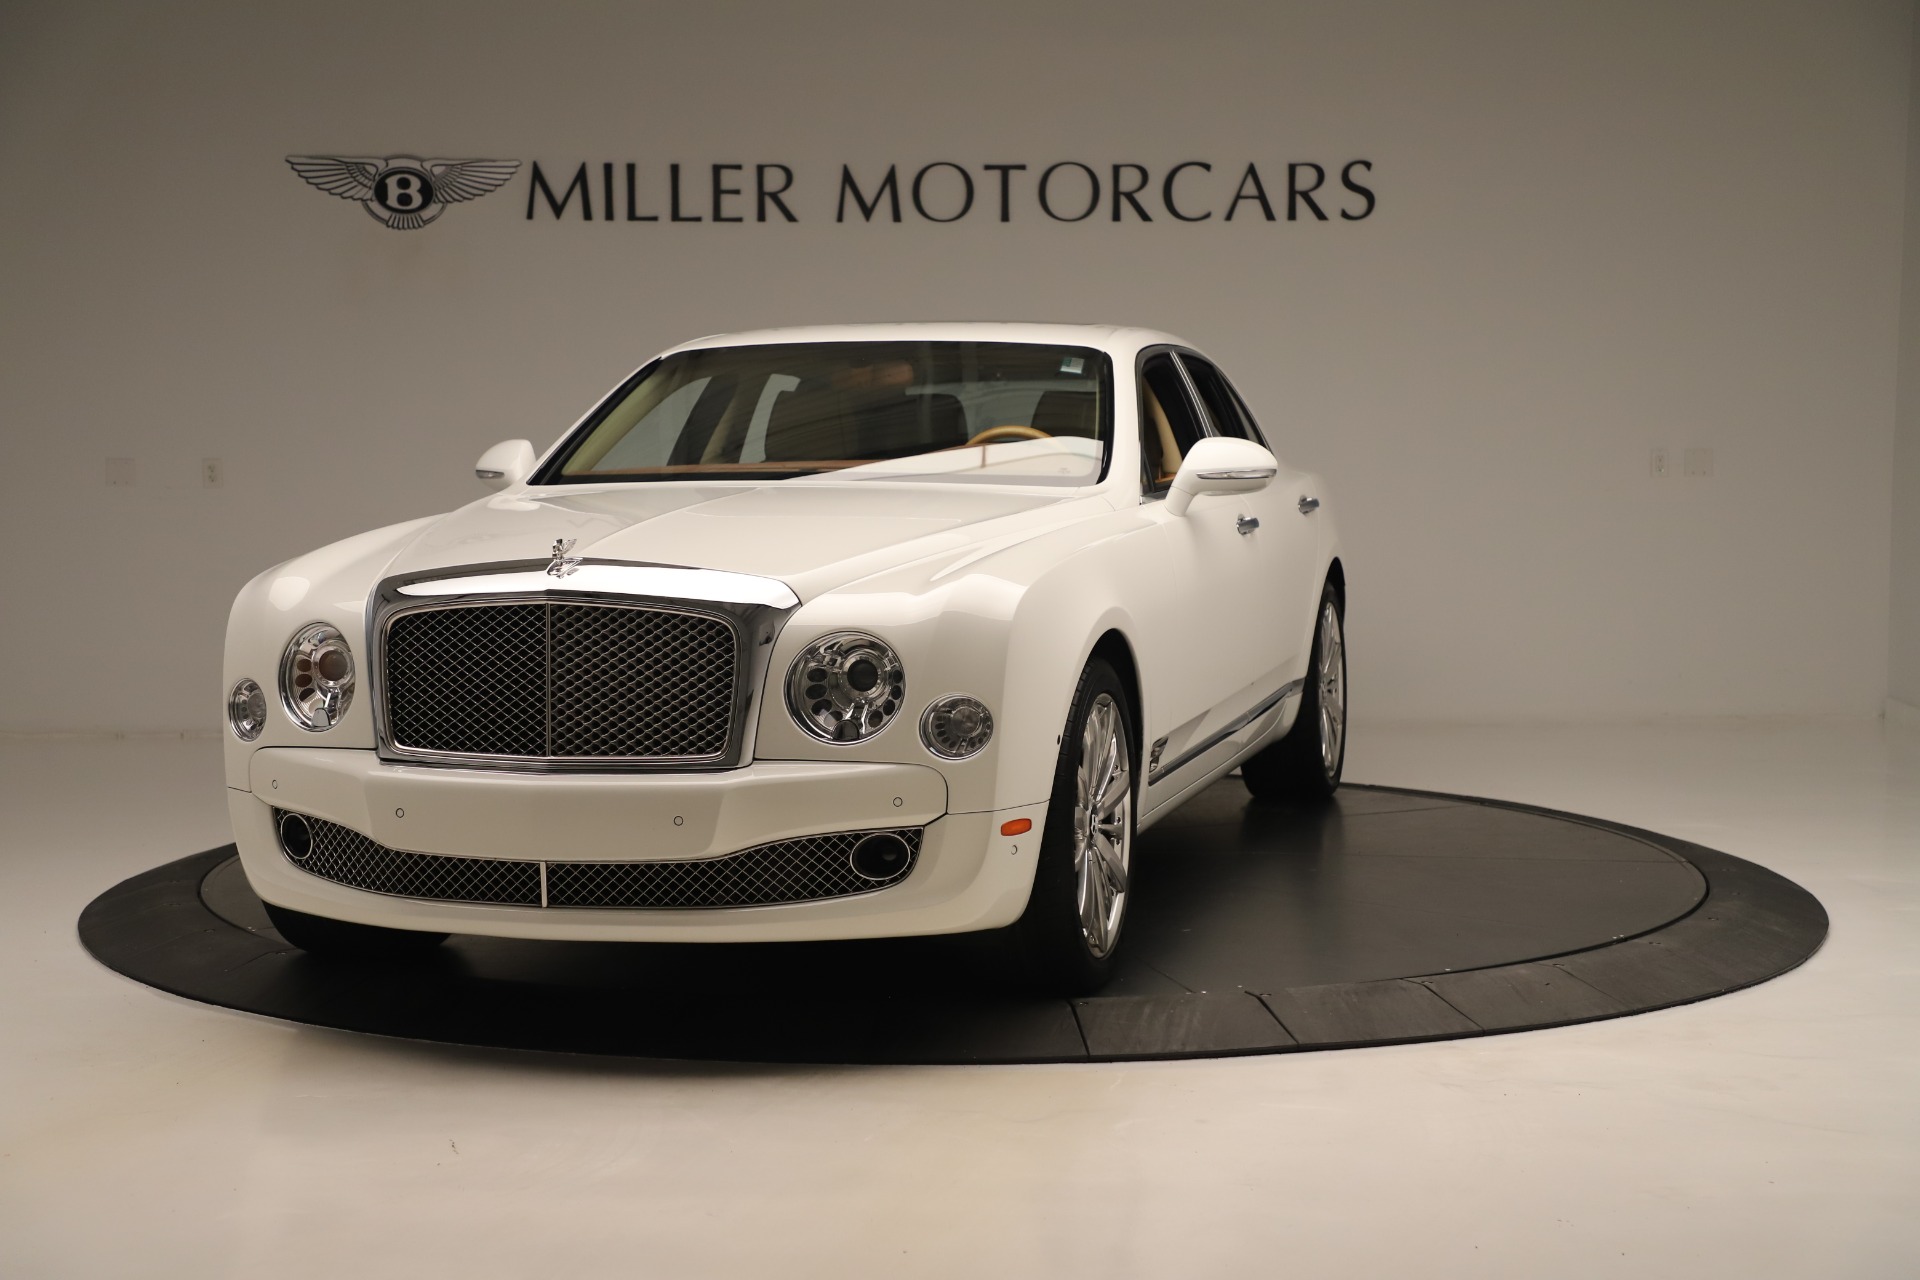 Used 2016 Bentley Mulsanne for sale Sold at Alfa Romeo of Greenwich in Greenwich CT 06830 1